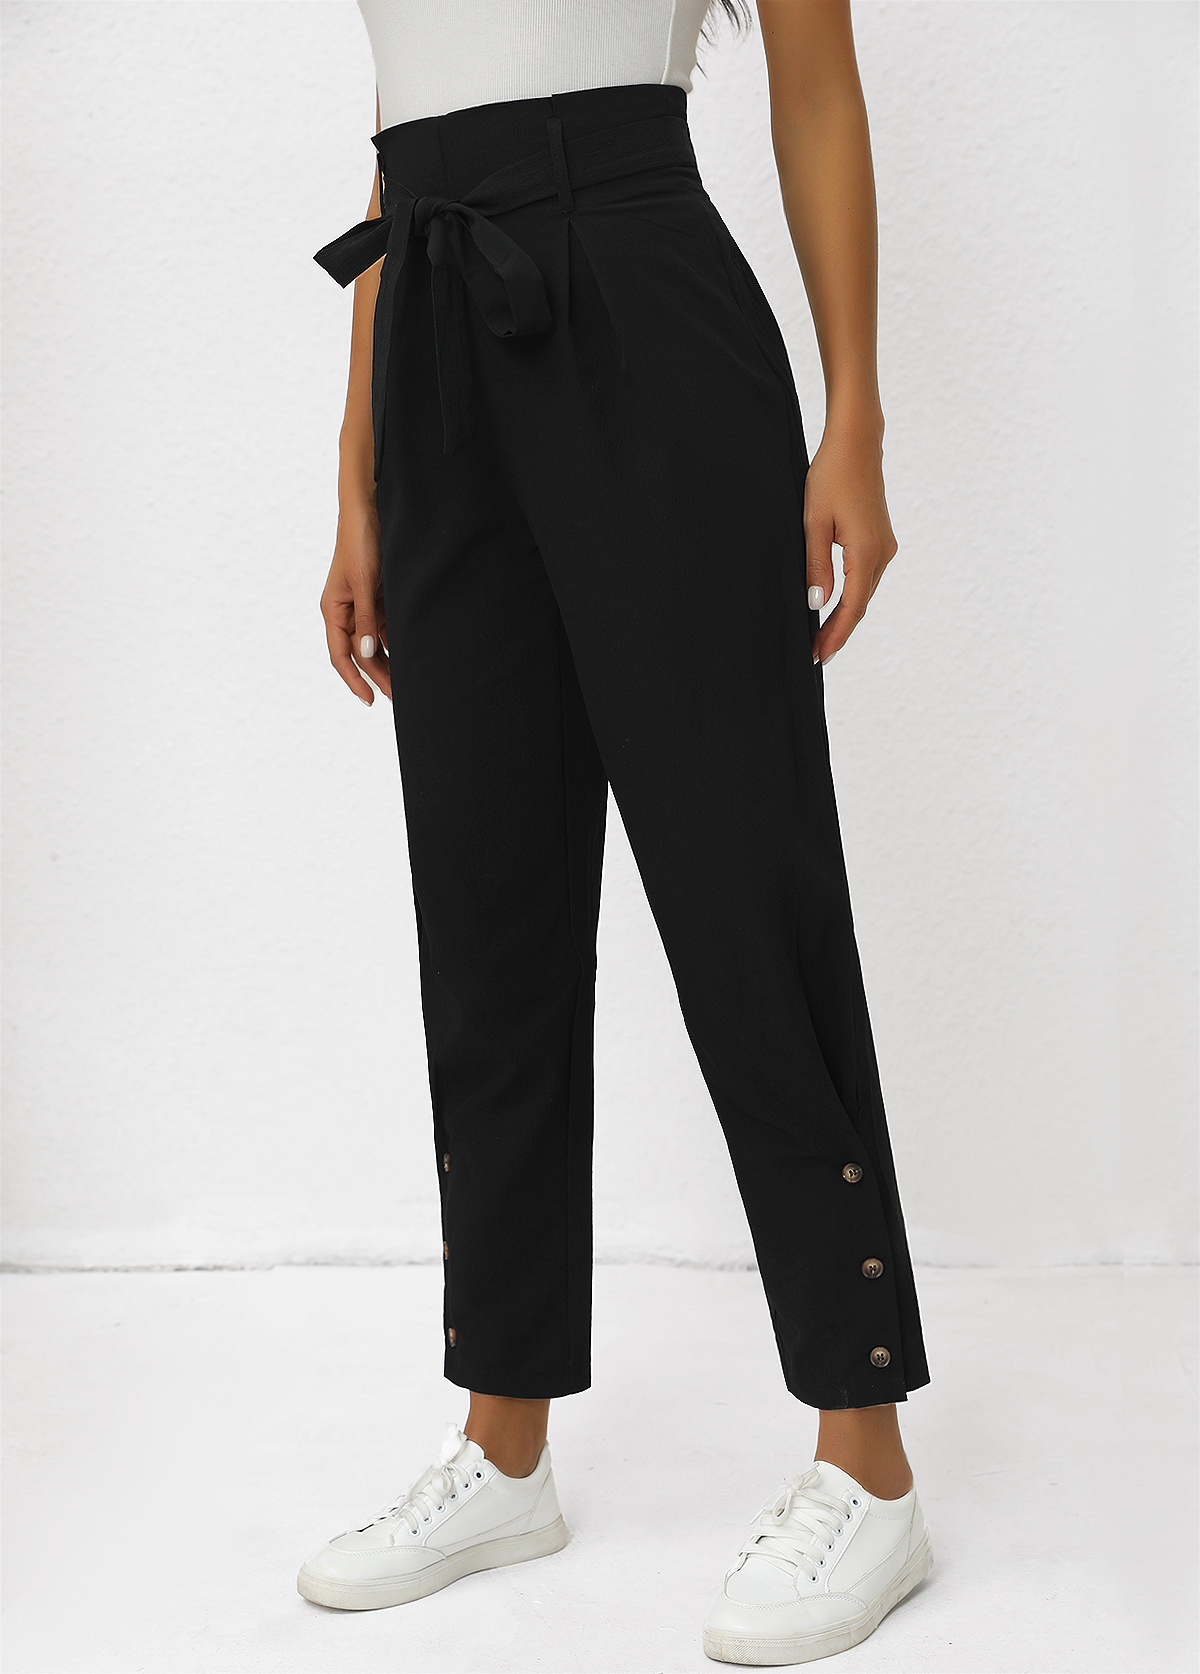 Black Button Belted Zipper Fly High Waisted Pants